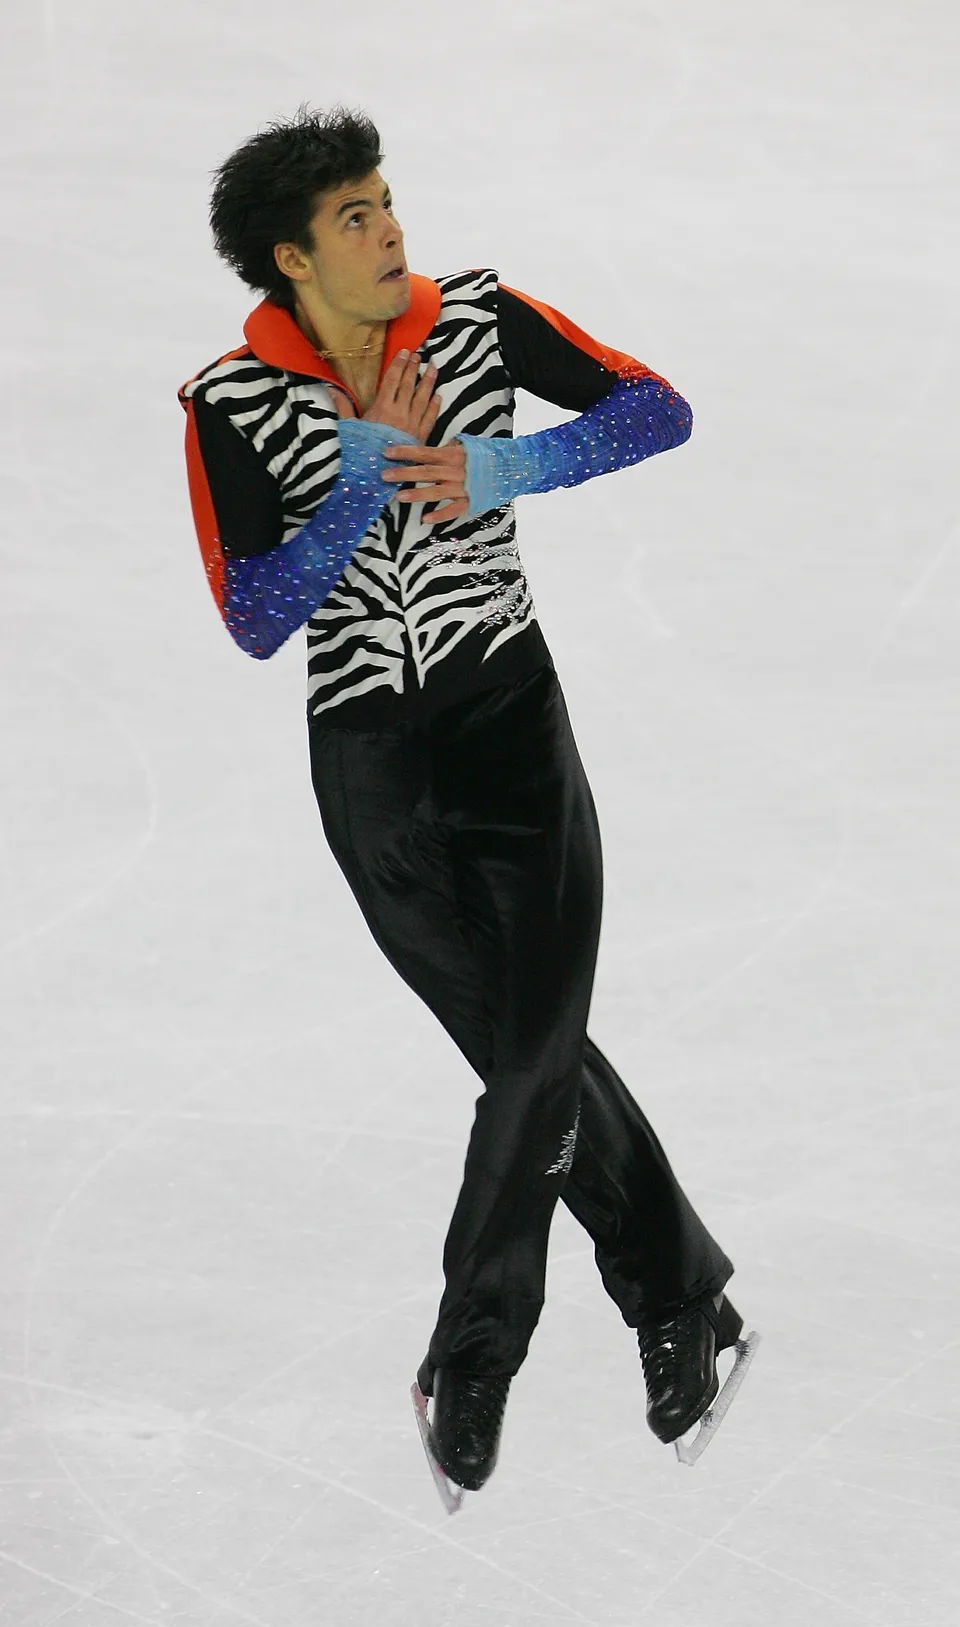 The Epic Evolution Of Men's Figure Skating Costumes Through The Years |  HuffPost Life